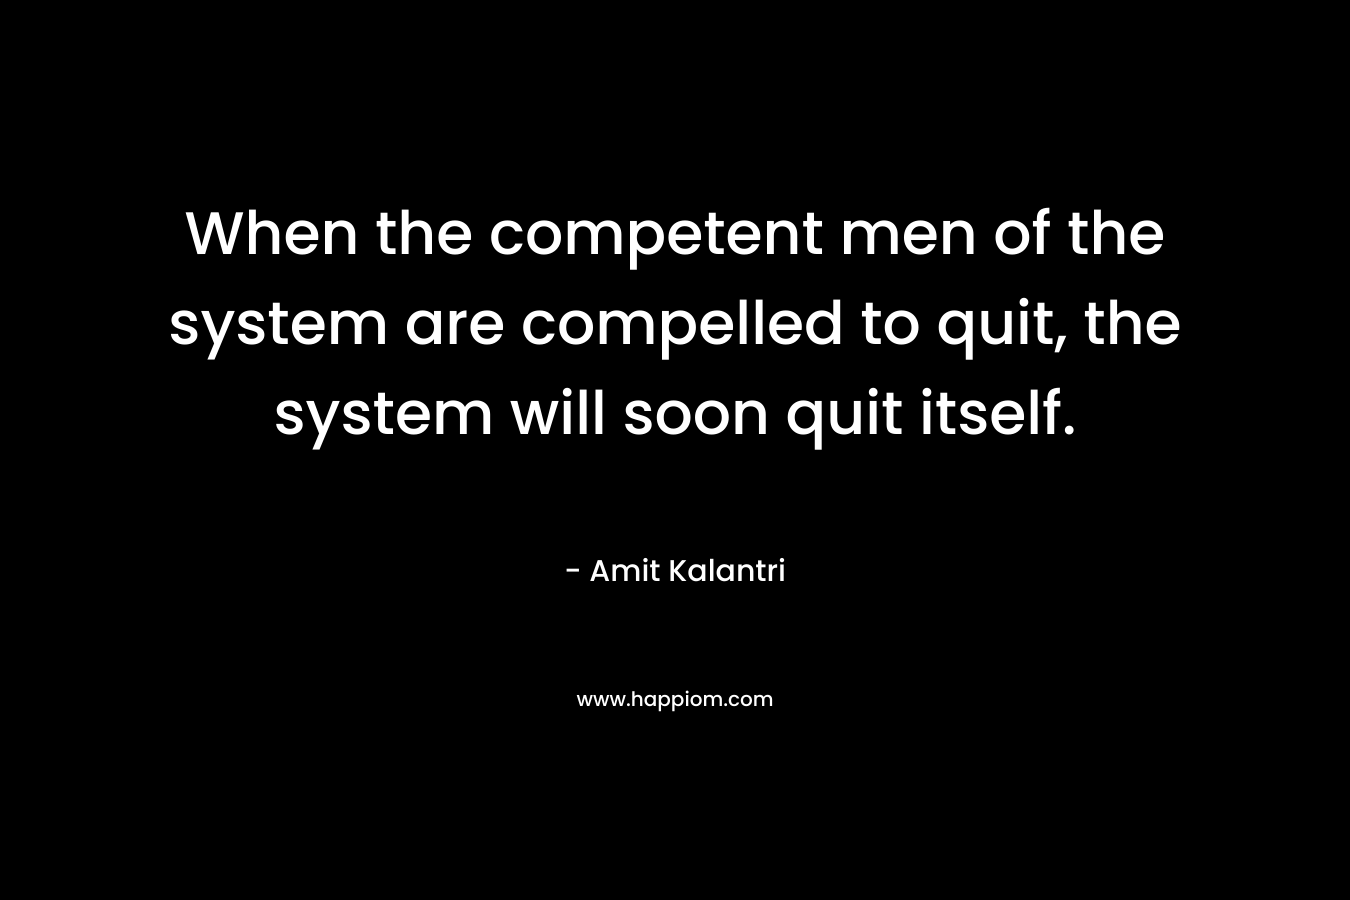 When the competent men of the system are compelled to quit, the system will soon quit itself.